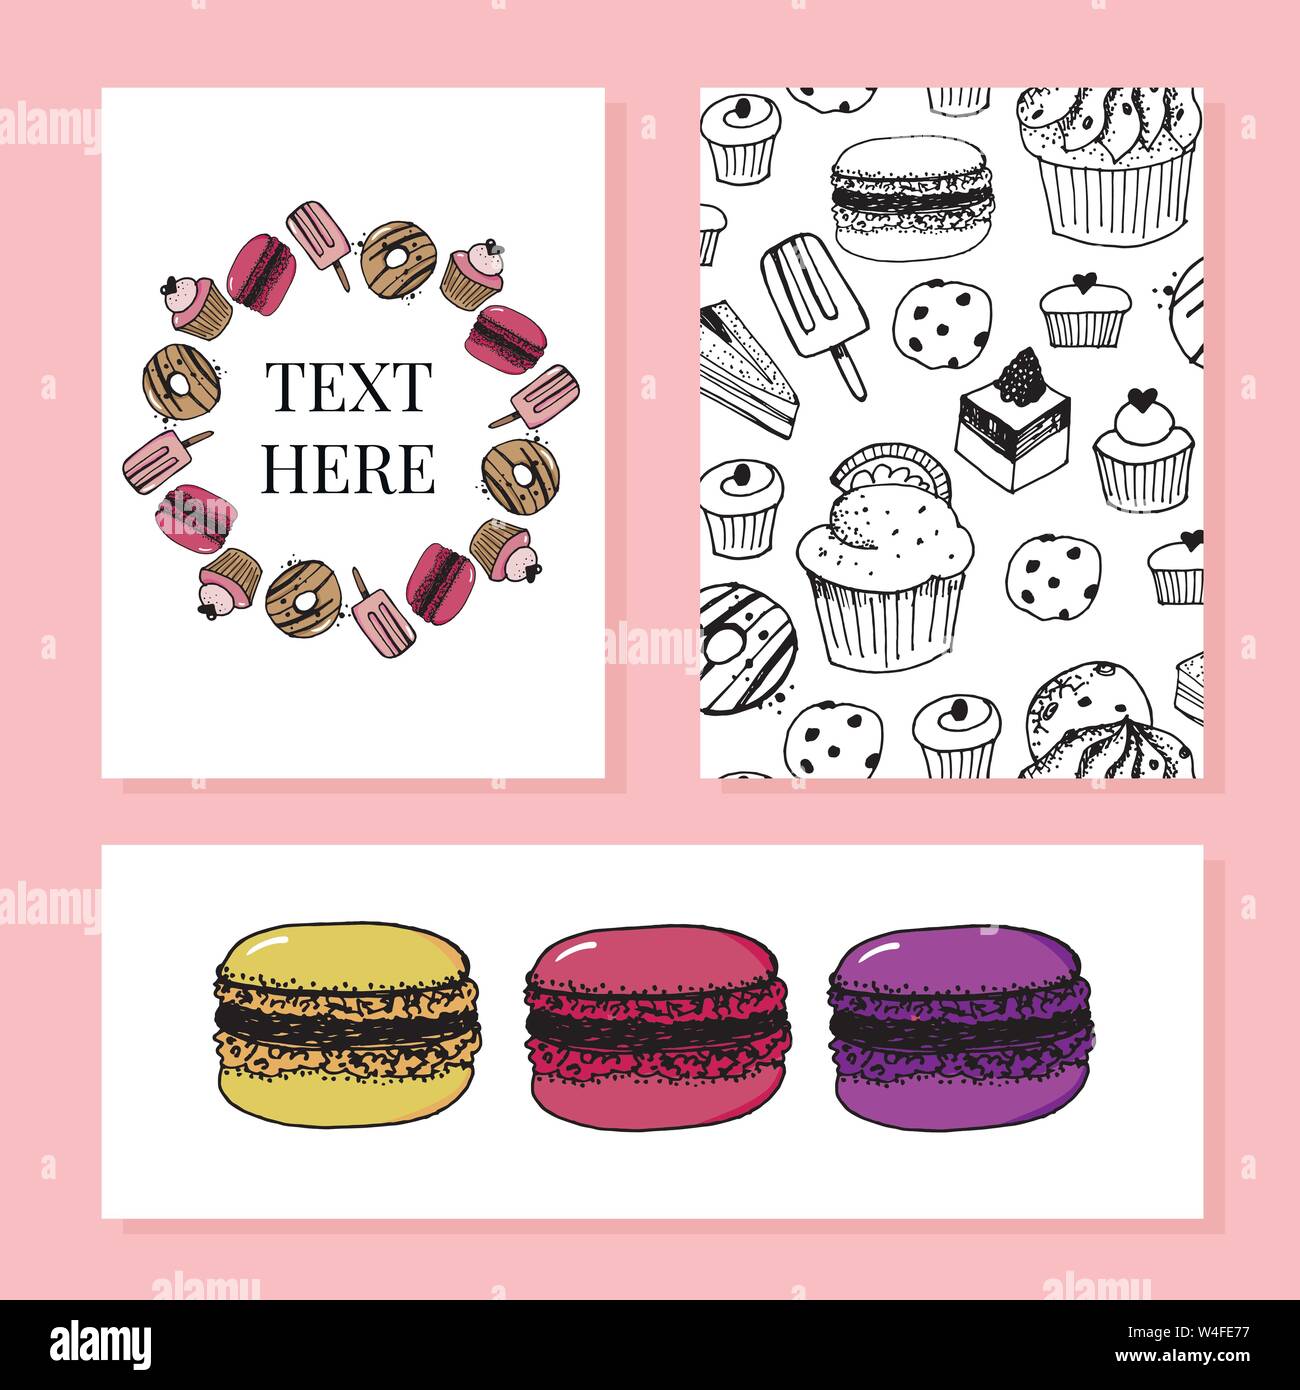 Bakery, pastry sweets and desserts vector banners with cakes and cupcakes, muffins, pies and tarts, vanilla biscuit puddings. Design for baker shop, c Stock Vector